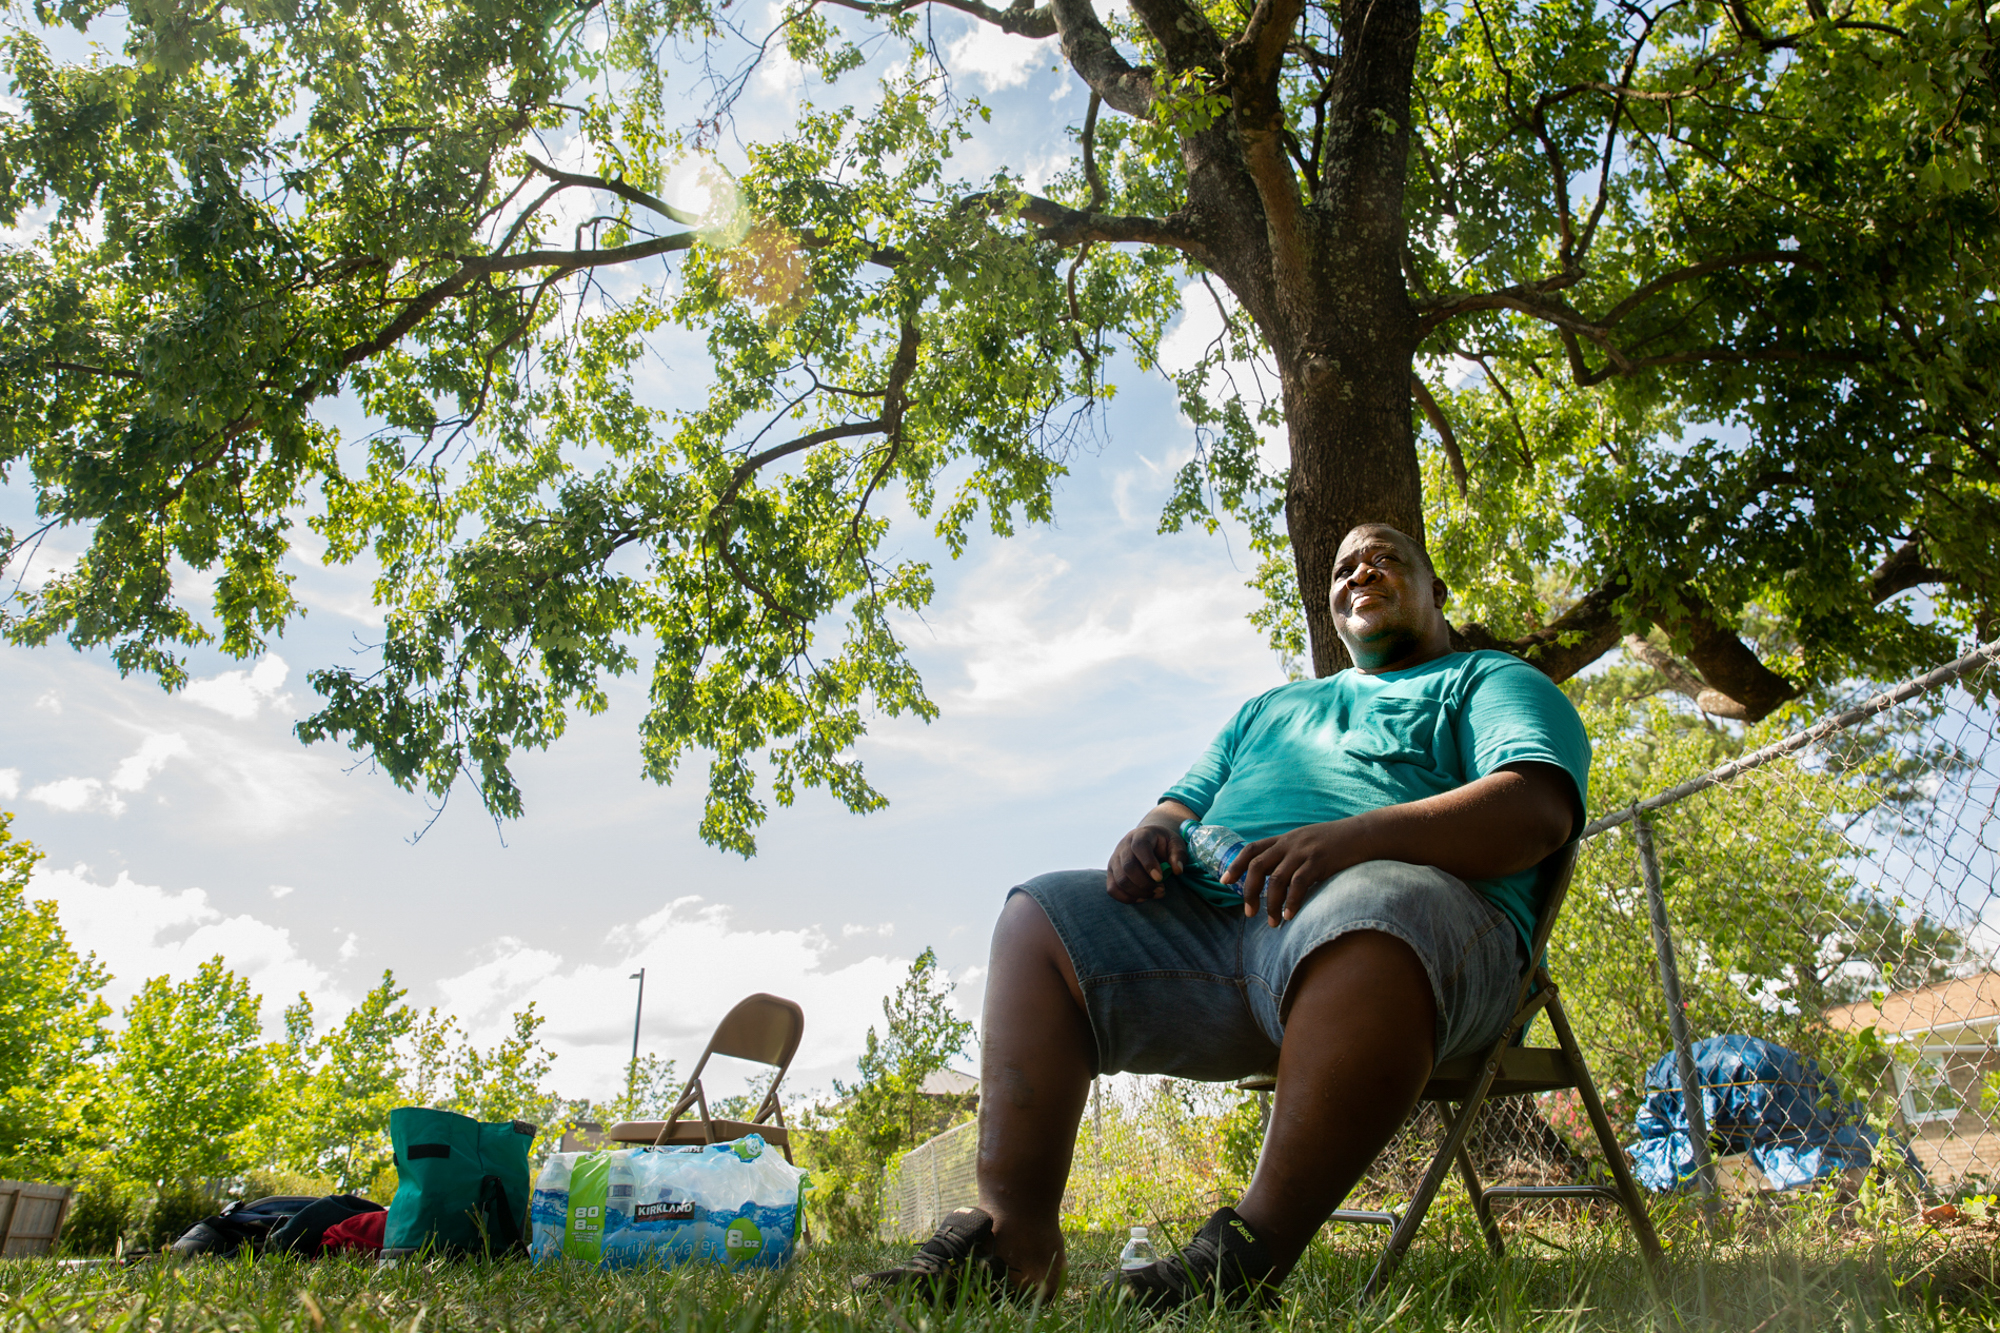 Herman “Leroy” Dukes - Herman “Leroy” Dukes sits under “the tree of knowledge” outside his destroyed family home in Wilmington, North Carolina. After Hurricane Florence, Dukes shuffled between shelters and hotels, and he recently began living on a rug under this tree. “This has taught me to be humble and to be patient,” Dukes said. “And, you know, still keep moving.” (Harrison Mantas/News21)